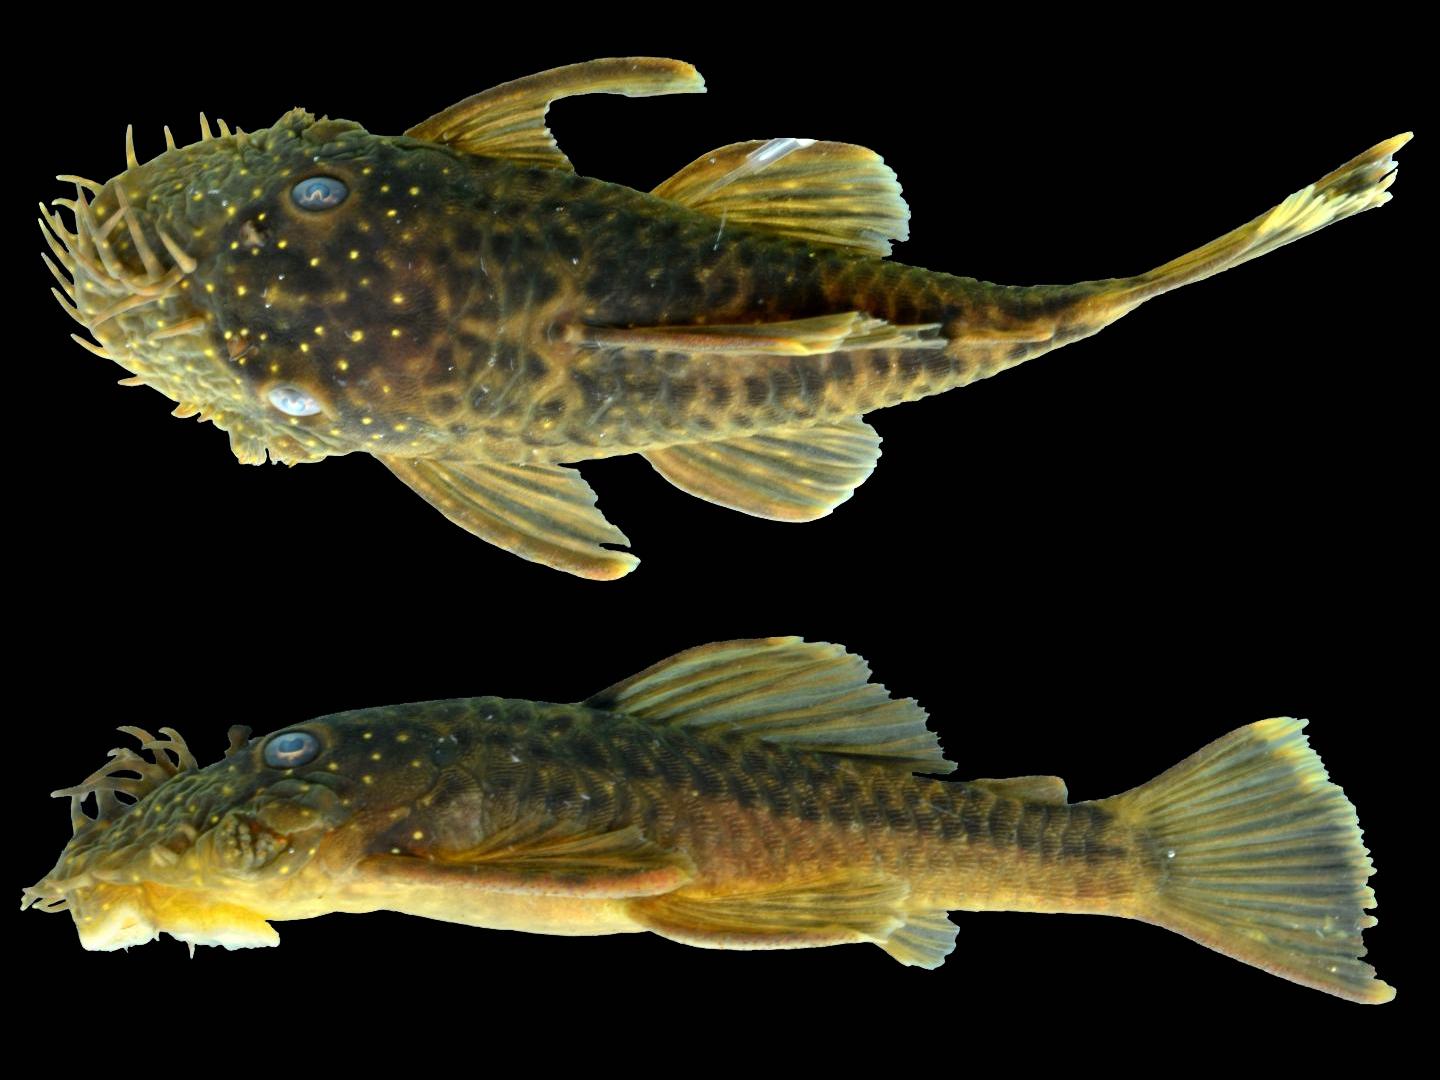 One of the new species of catfish, named Ancistrus kellerae